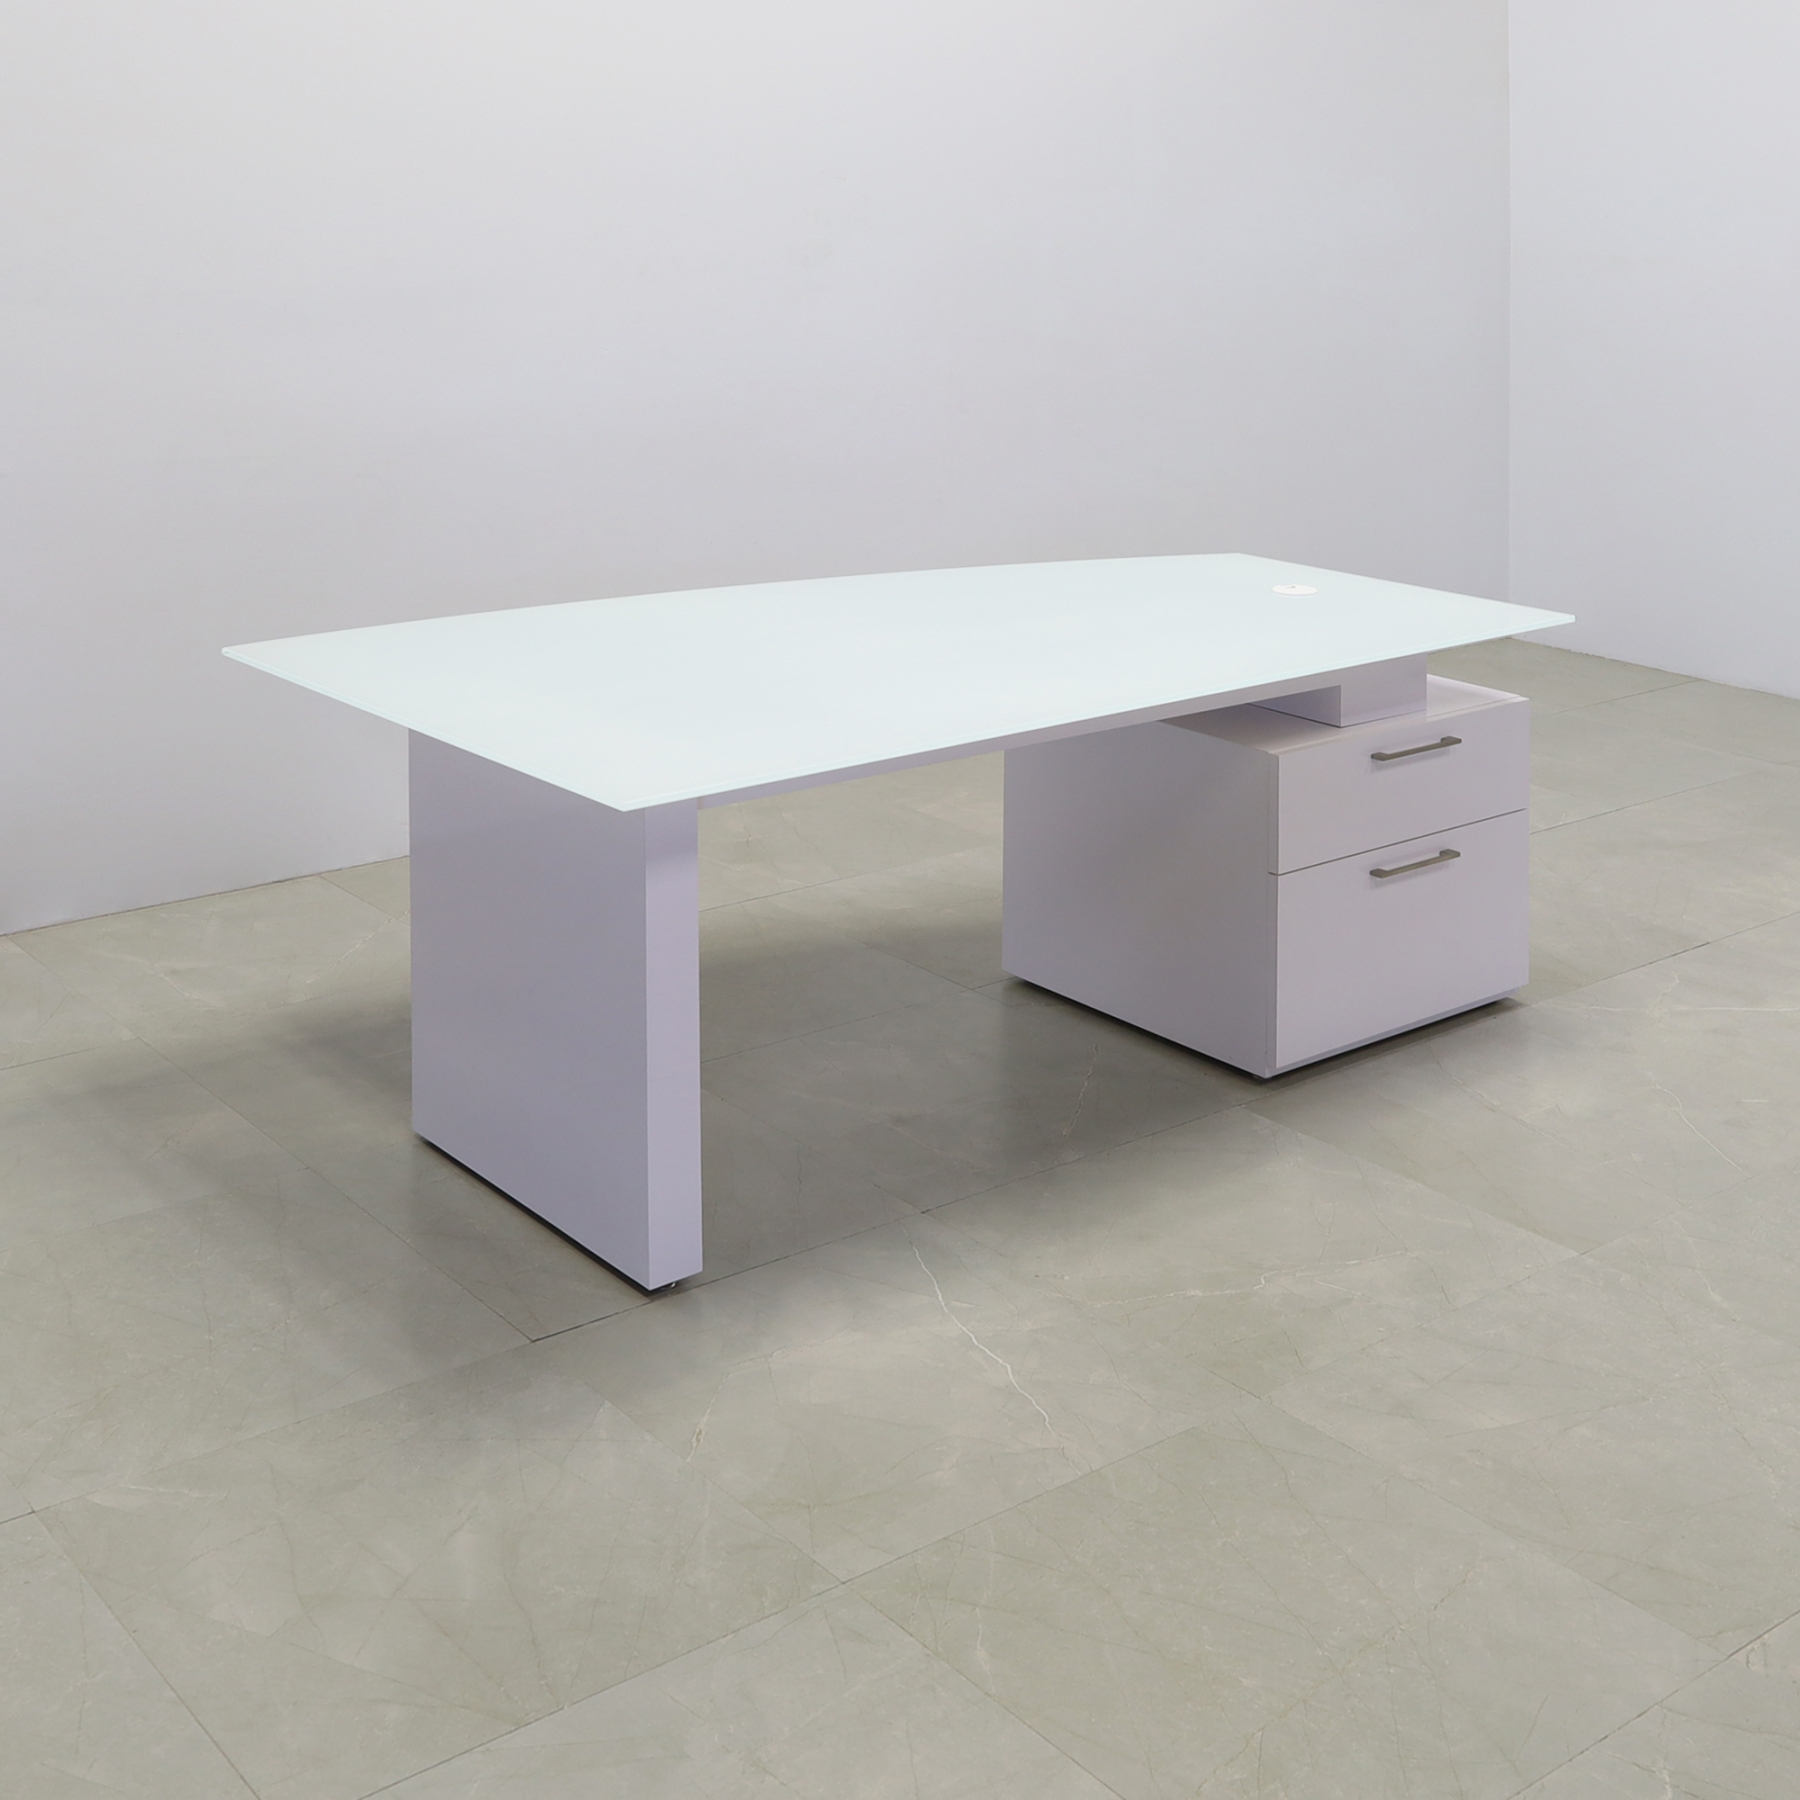 Ultra Modern White Lacquer Executive Desk with Three Drawers - OfficeDesk .com